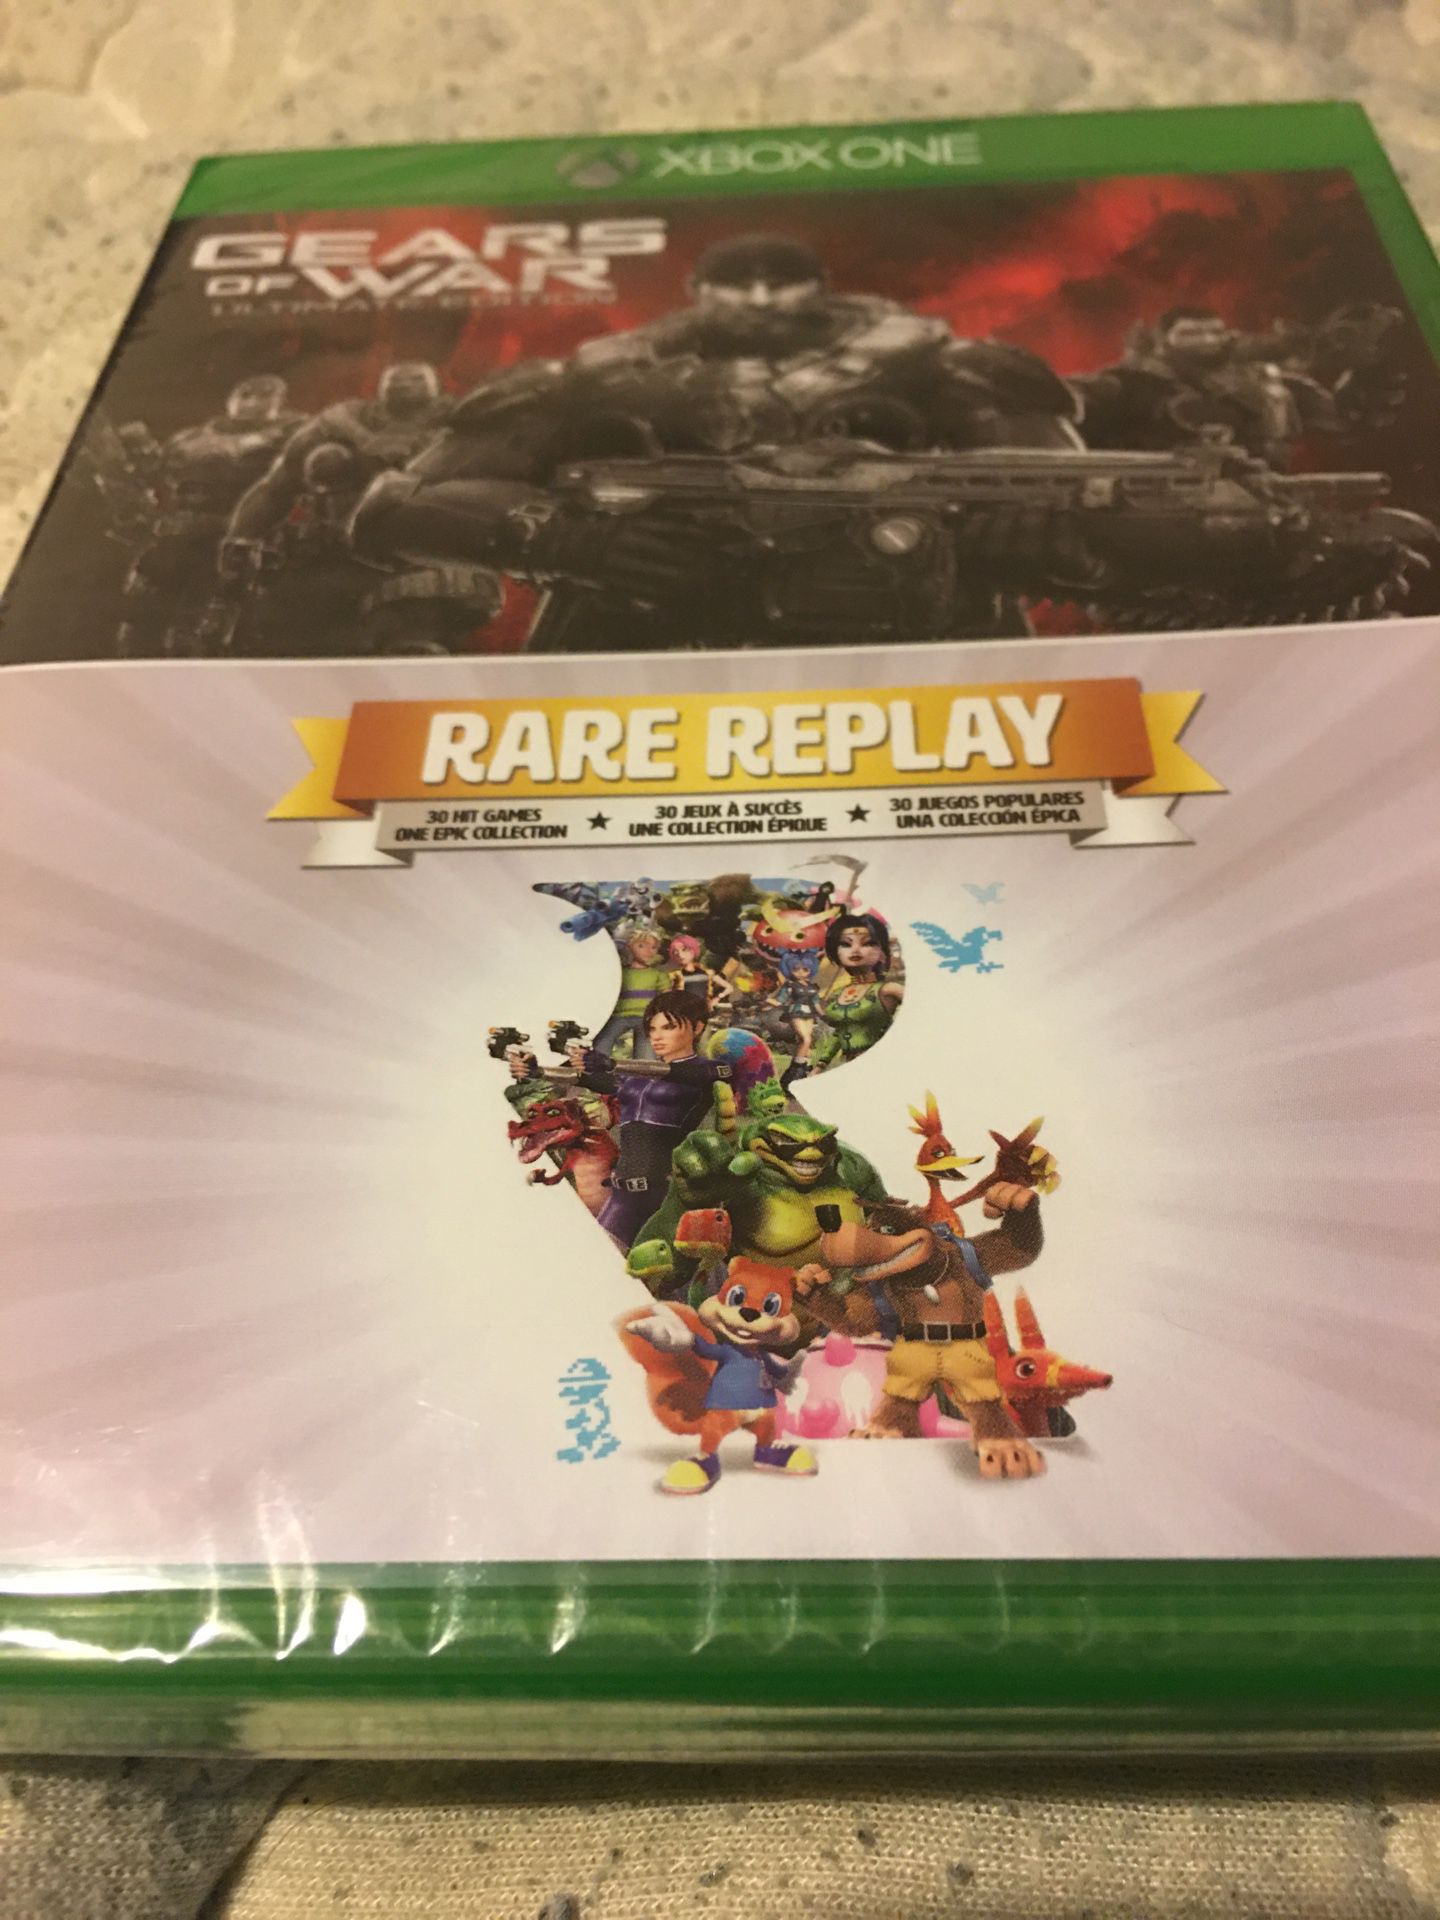 Gears of war & rare replay for Xbox one new sealed